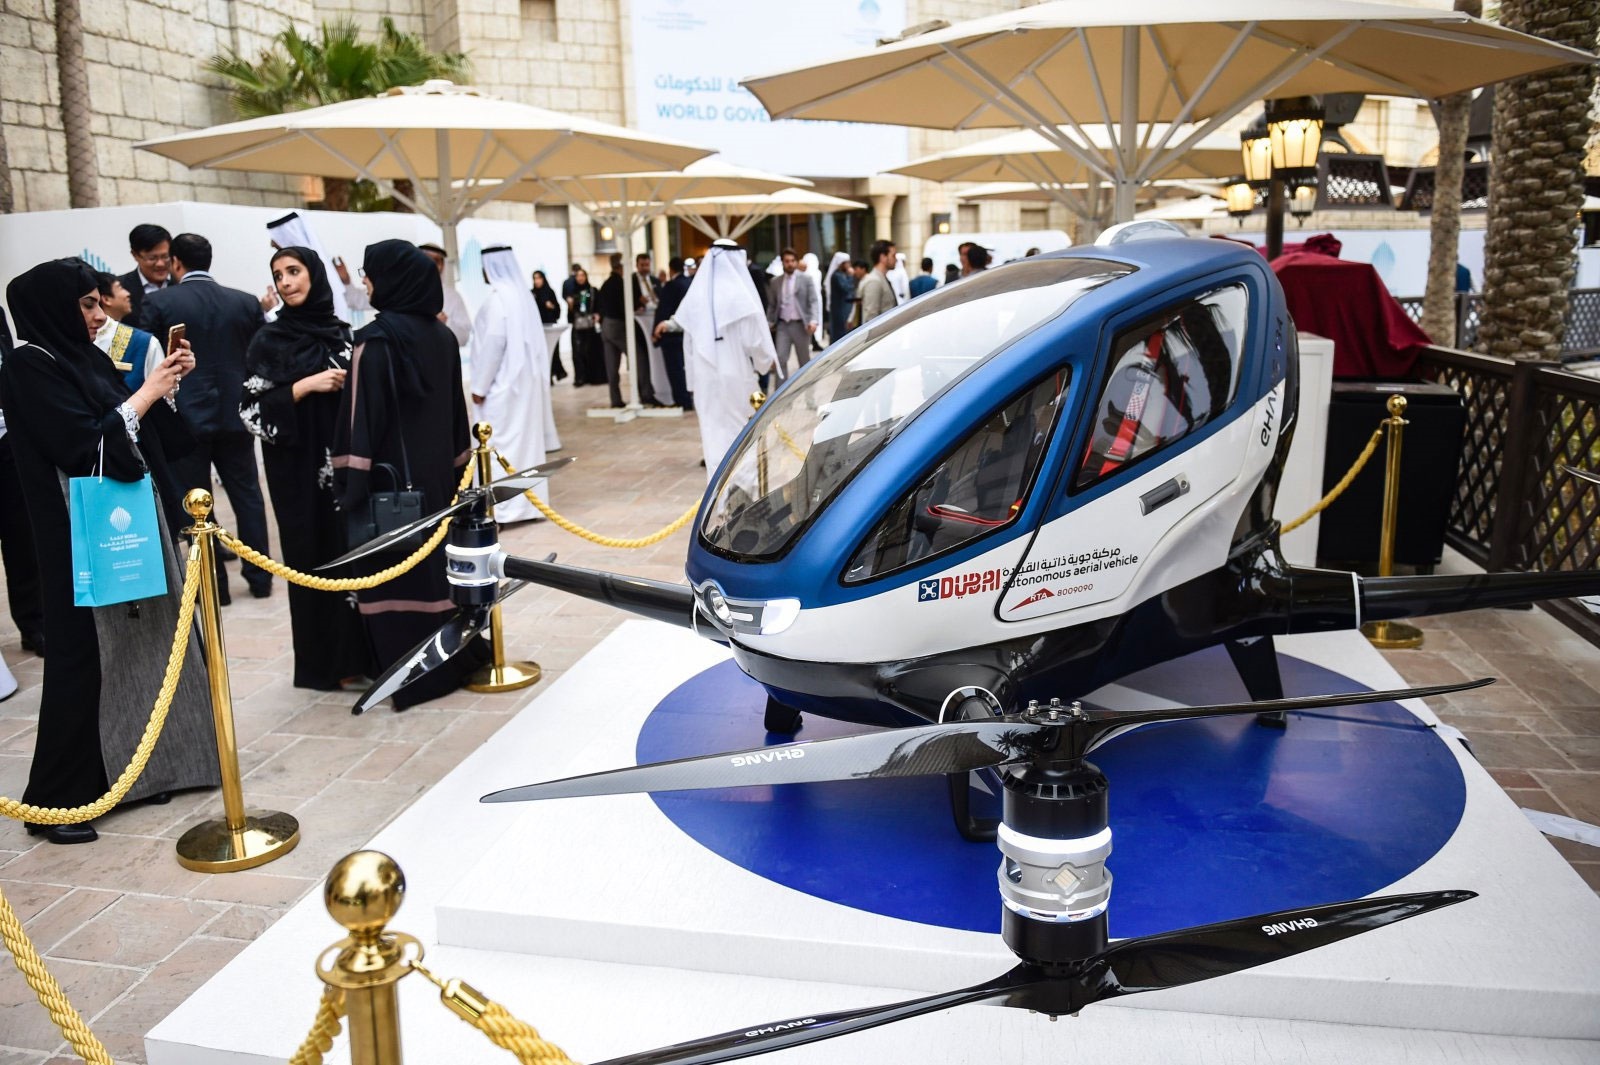 http://images.khabaronline.ir/images/2017/2/17-2-15-105411Drone-Flying-Cars-Will-Soar-Over-Dubai-This-Summer11.jpg